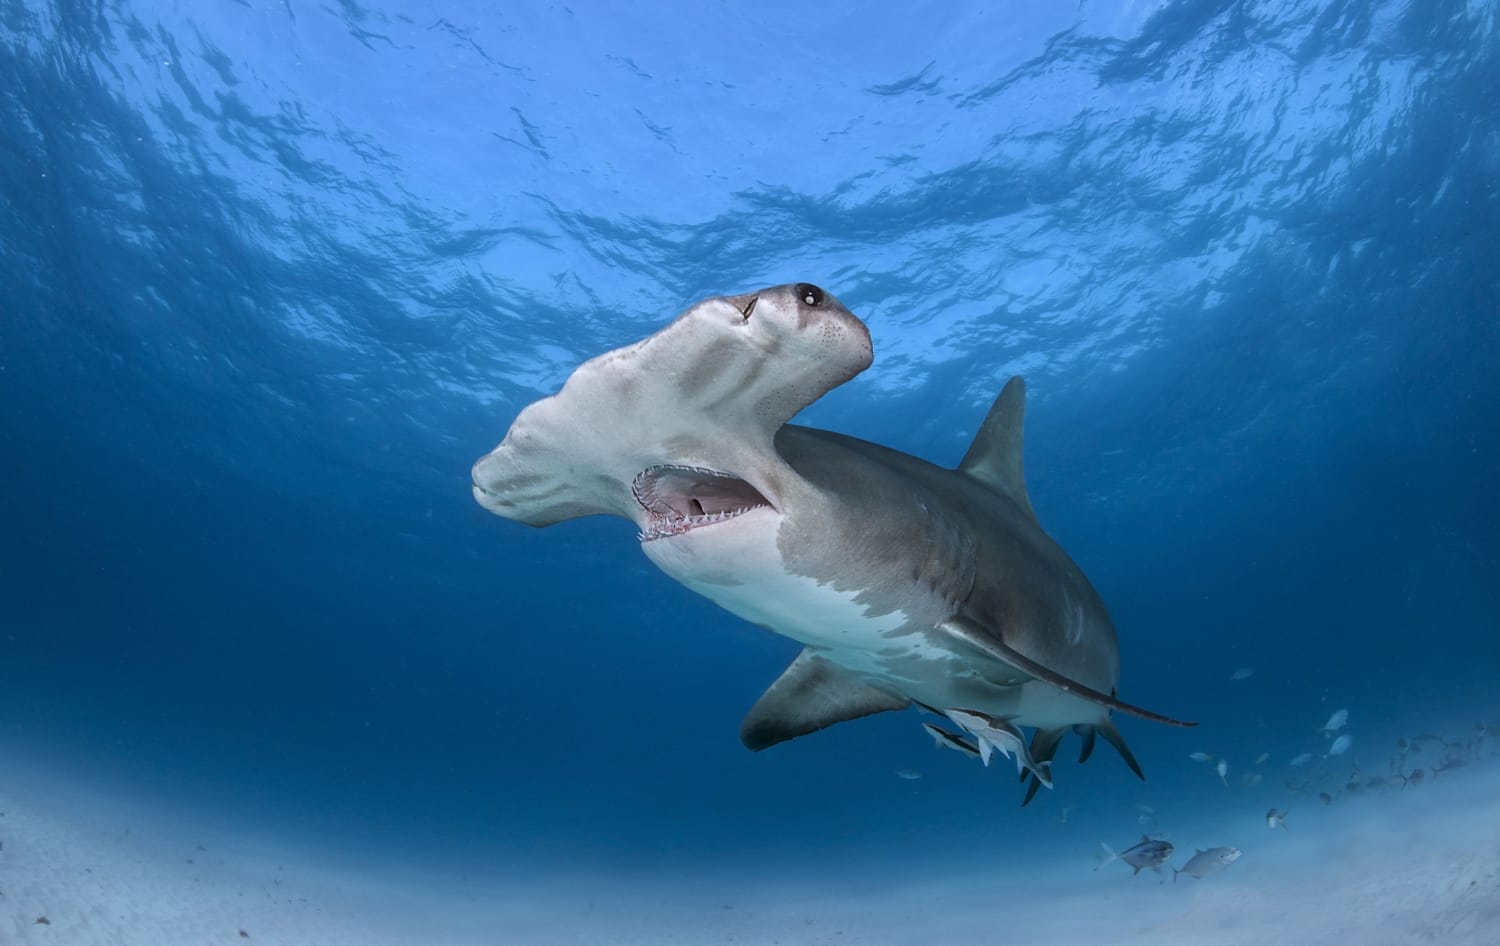 300+] Shark Pictures